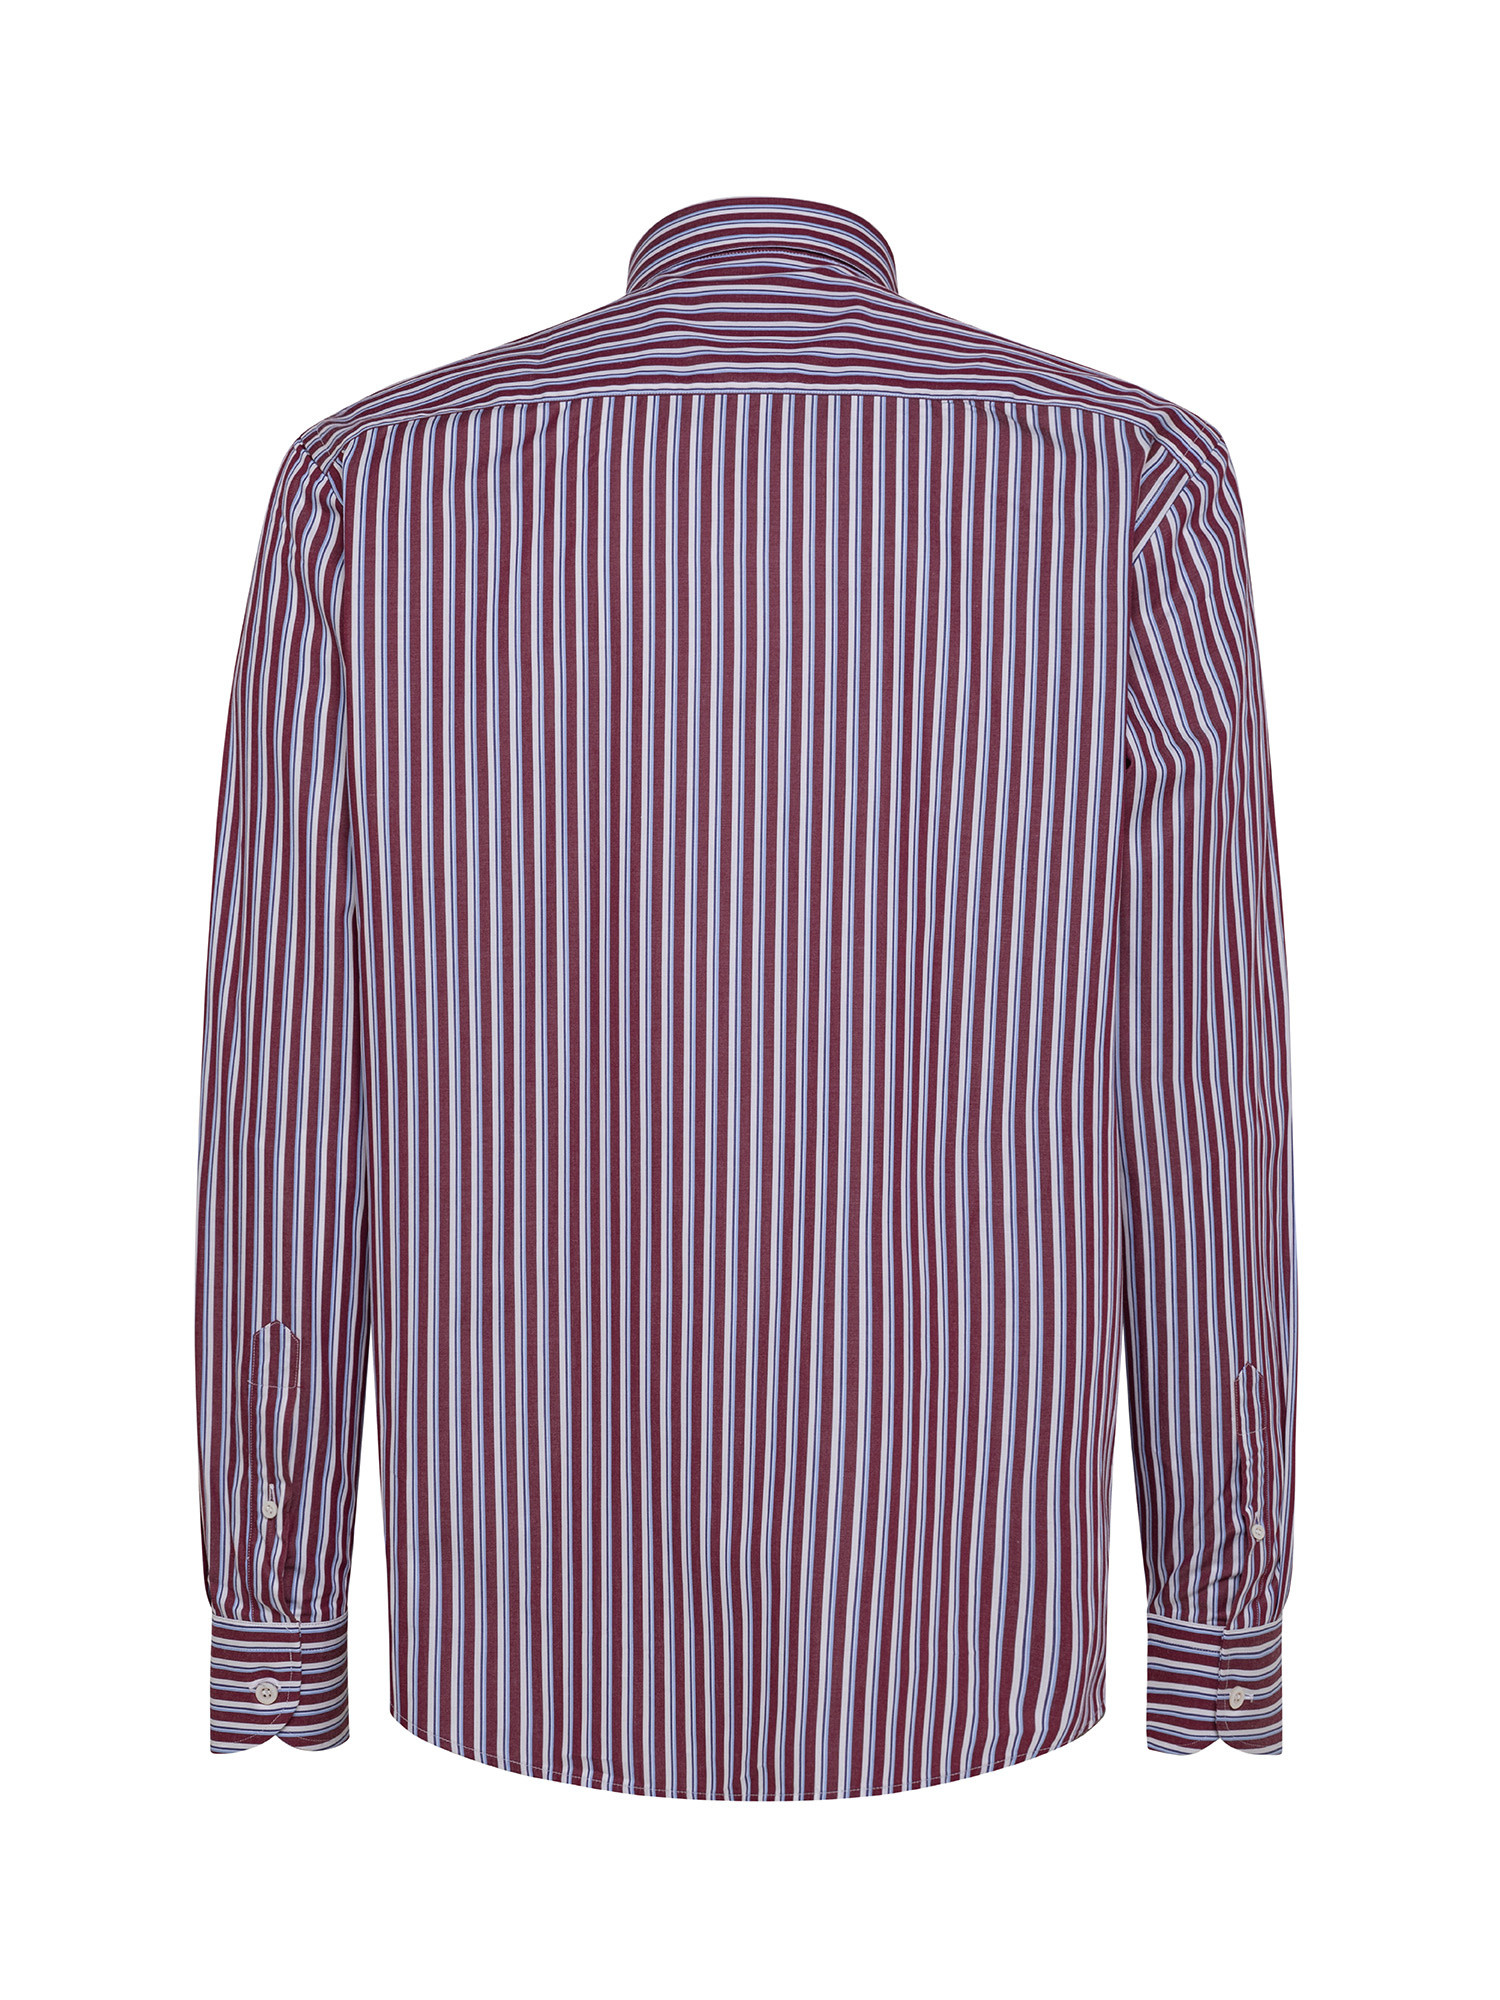 Luca D'Altieri - Tailor fit striped shirt in pure cotton, Red Bordeaux, large image number 2